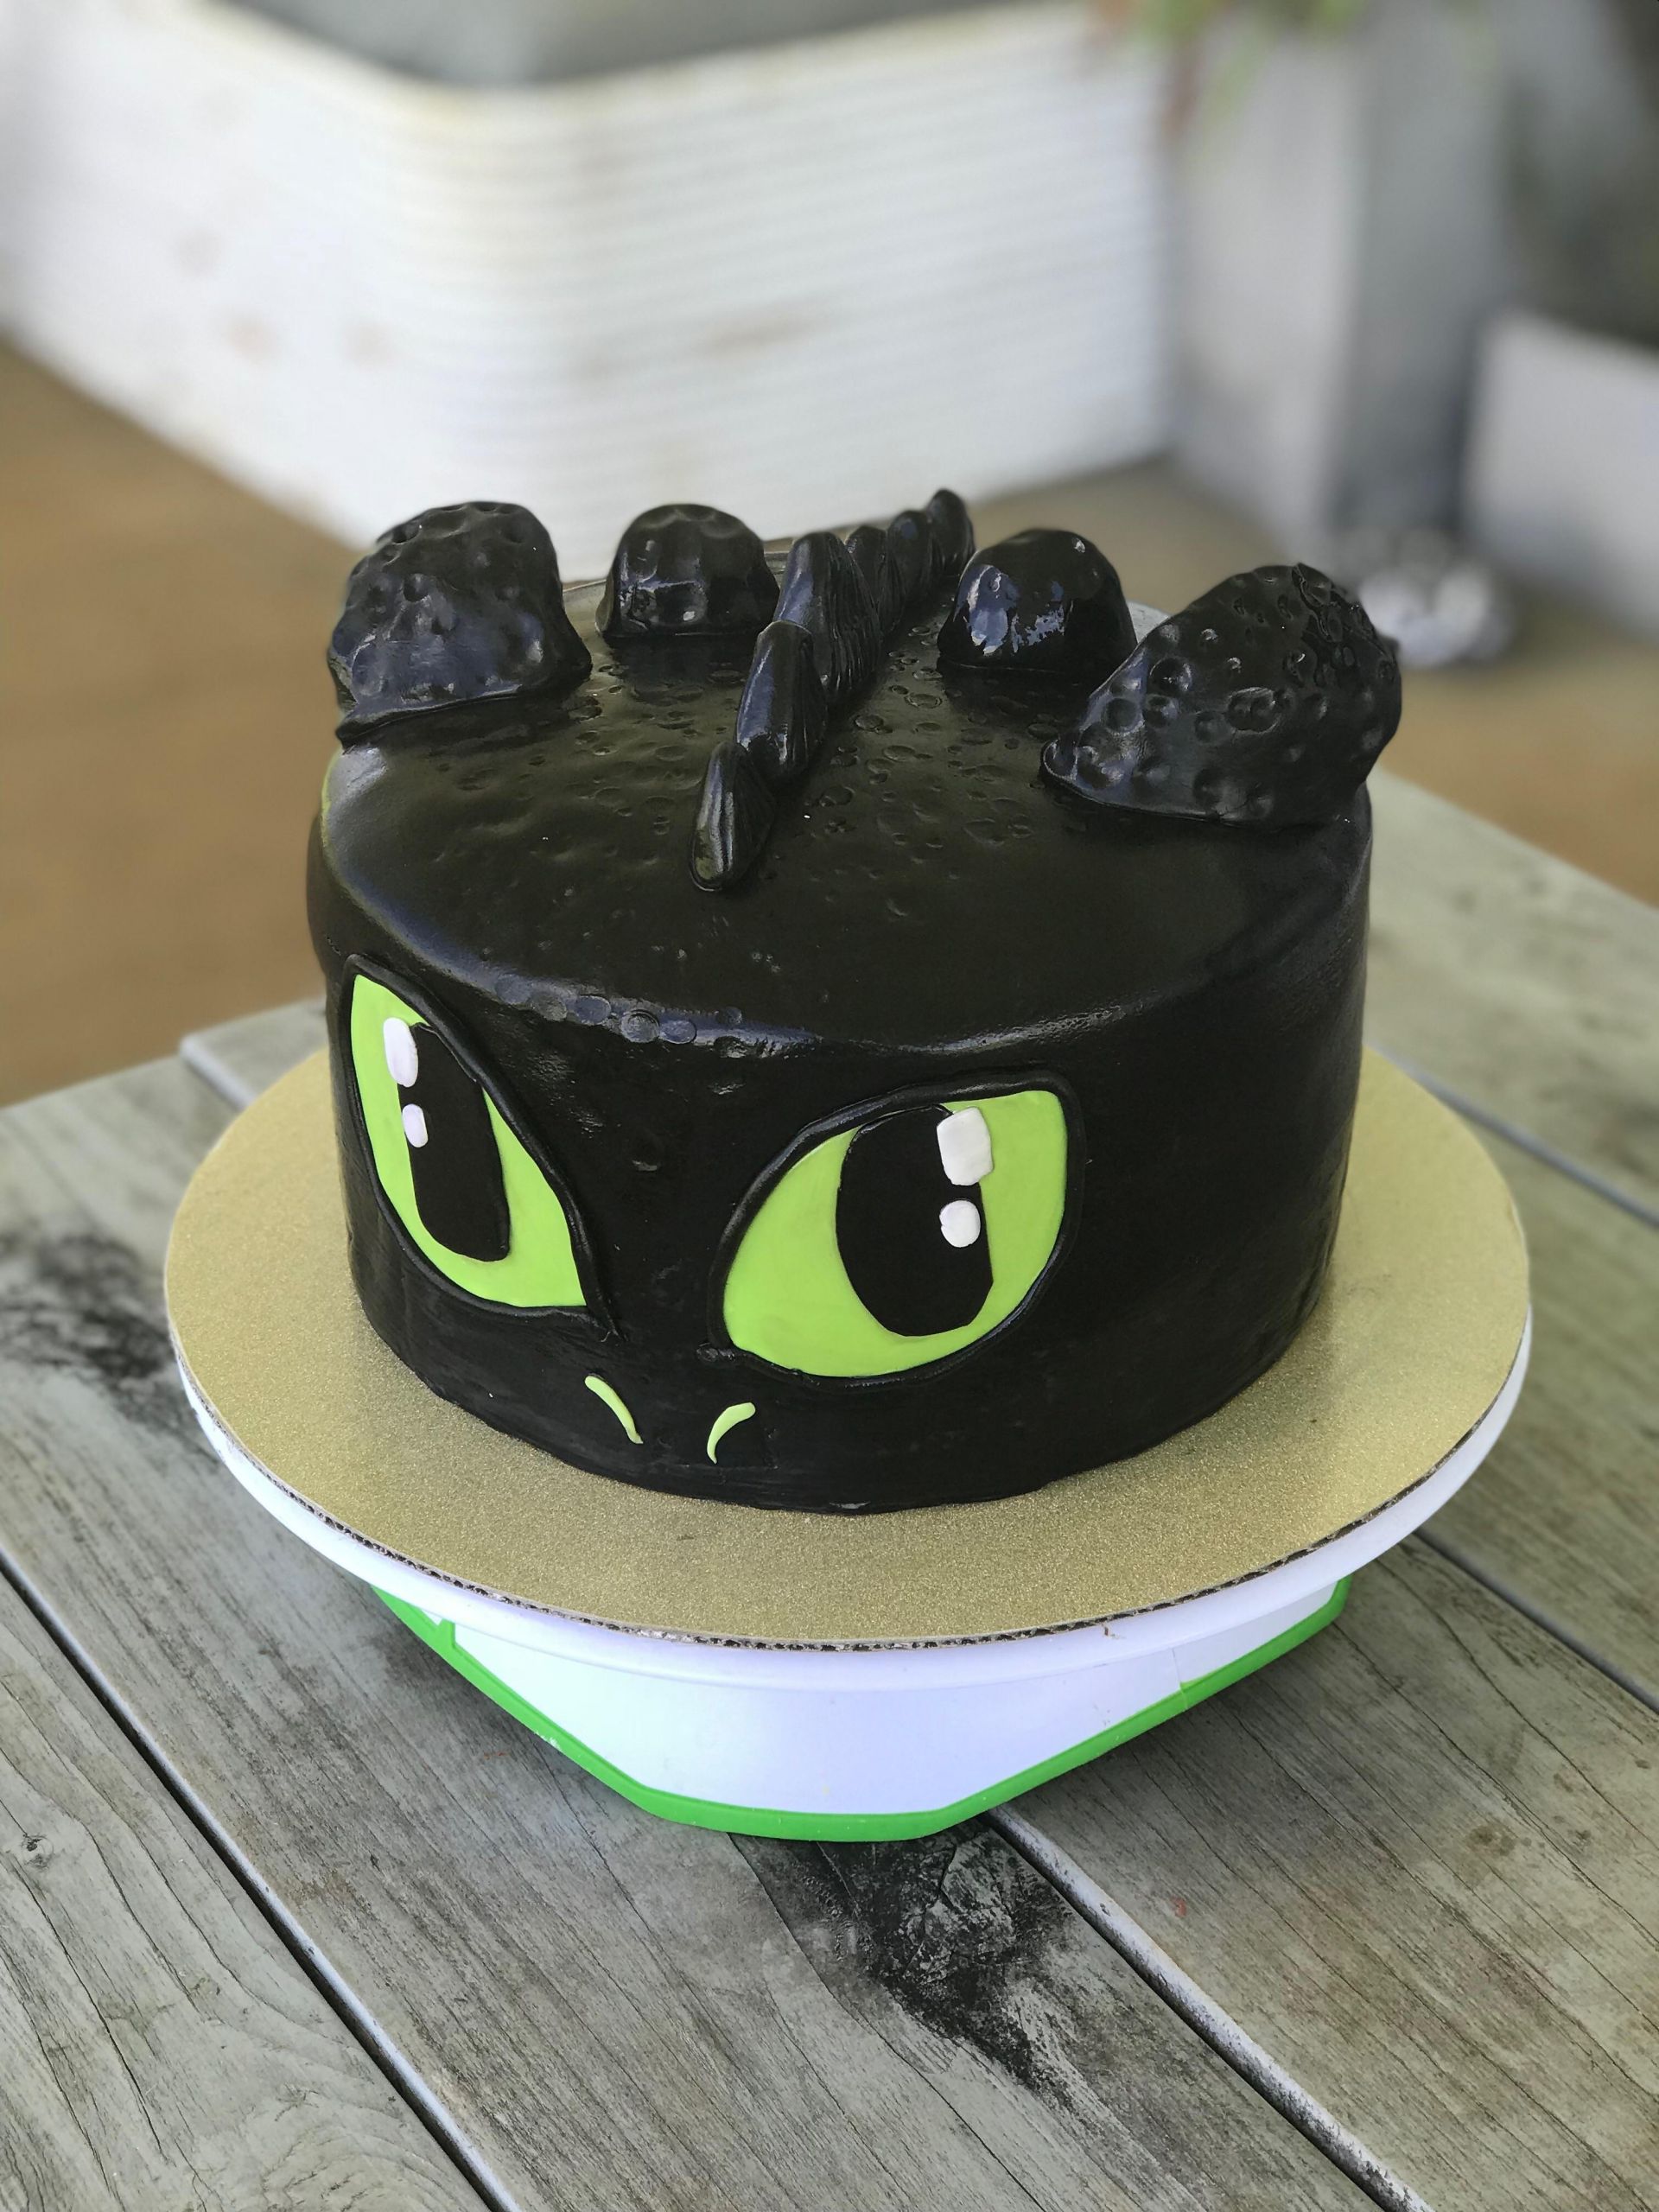 How To Train Your Dragon Birthday Cake
 How To Train Your Dragon "Toothless" Cake Baking